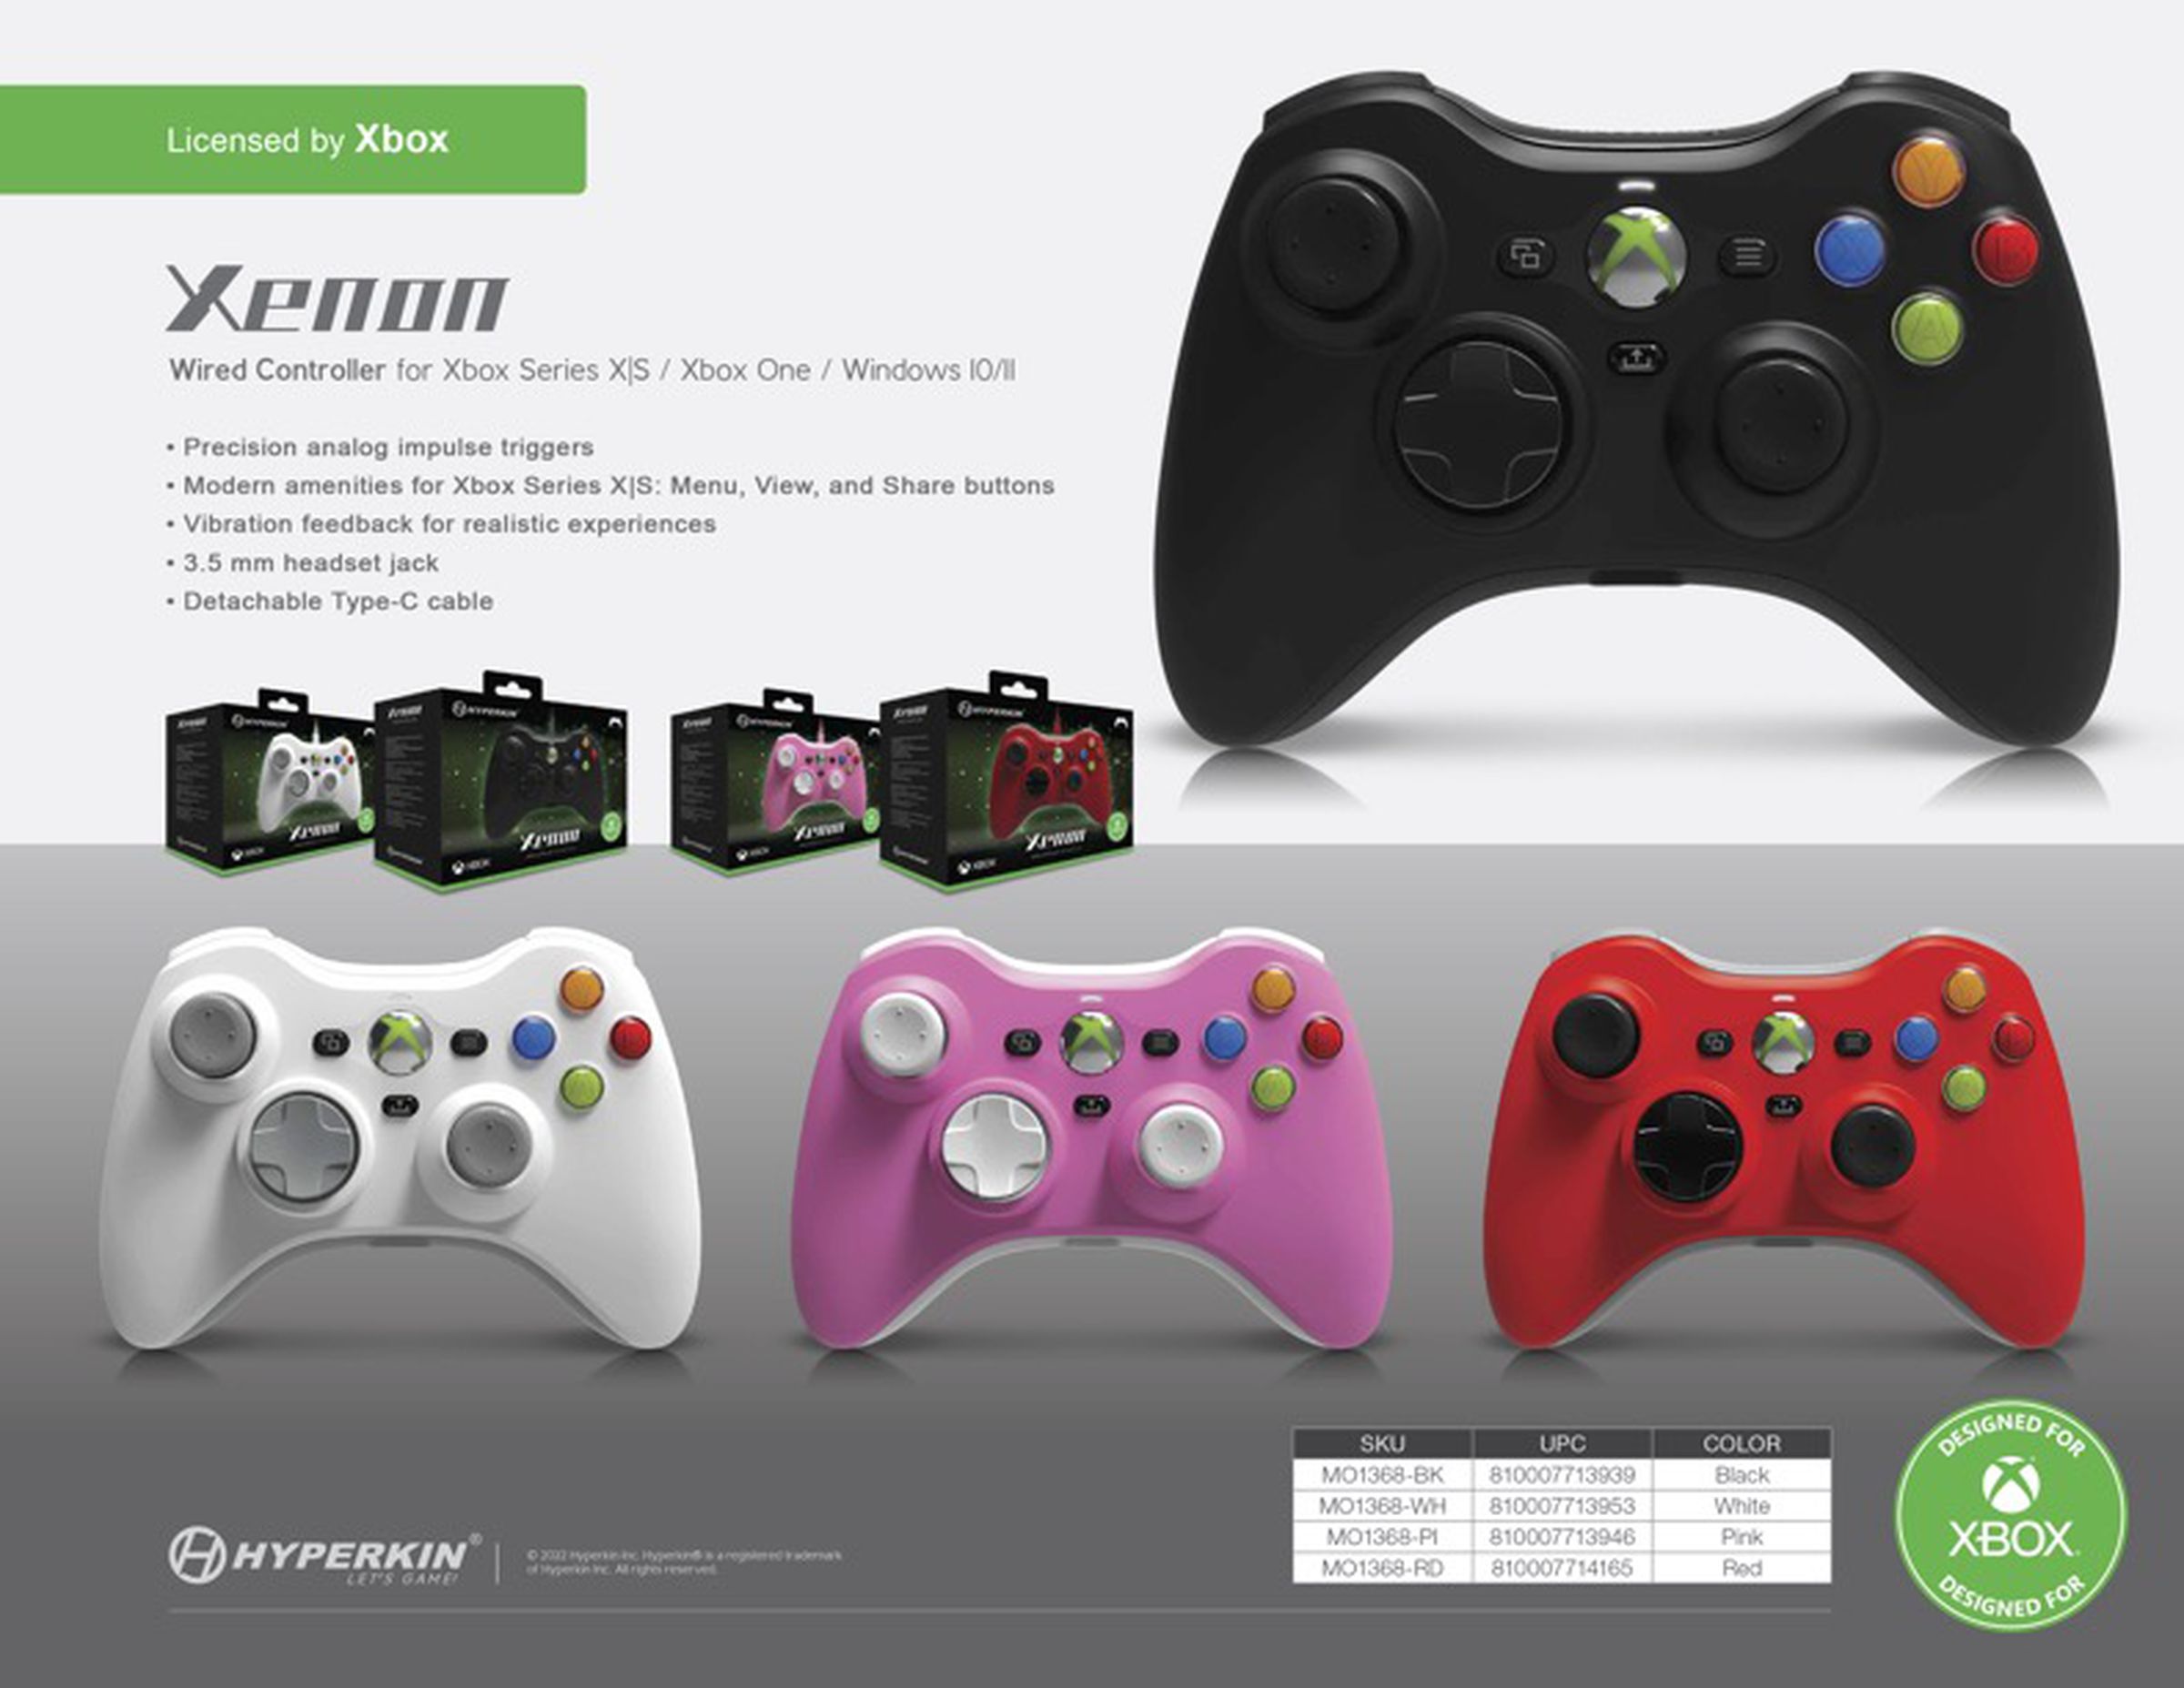 Hyperkin is remaking the Xbox 360 controller for modern consoles and PC